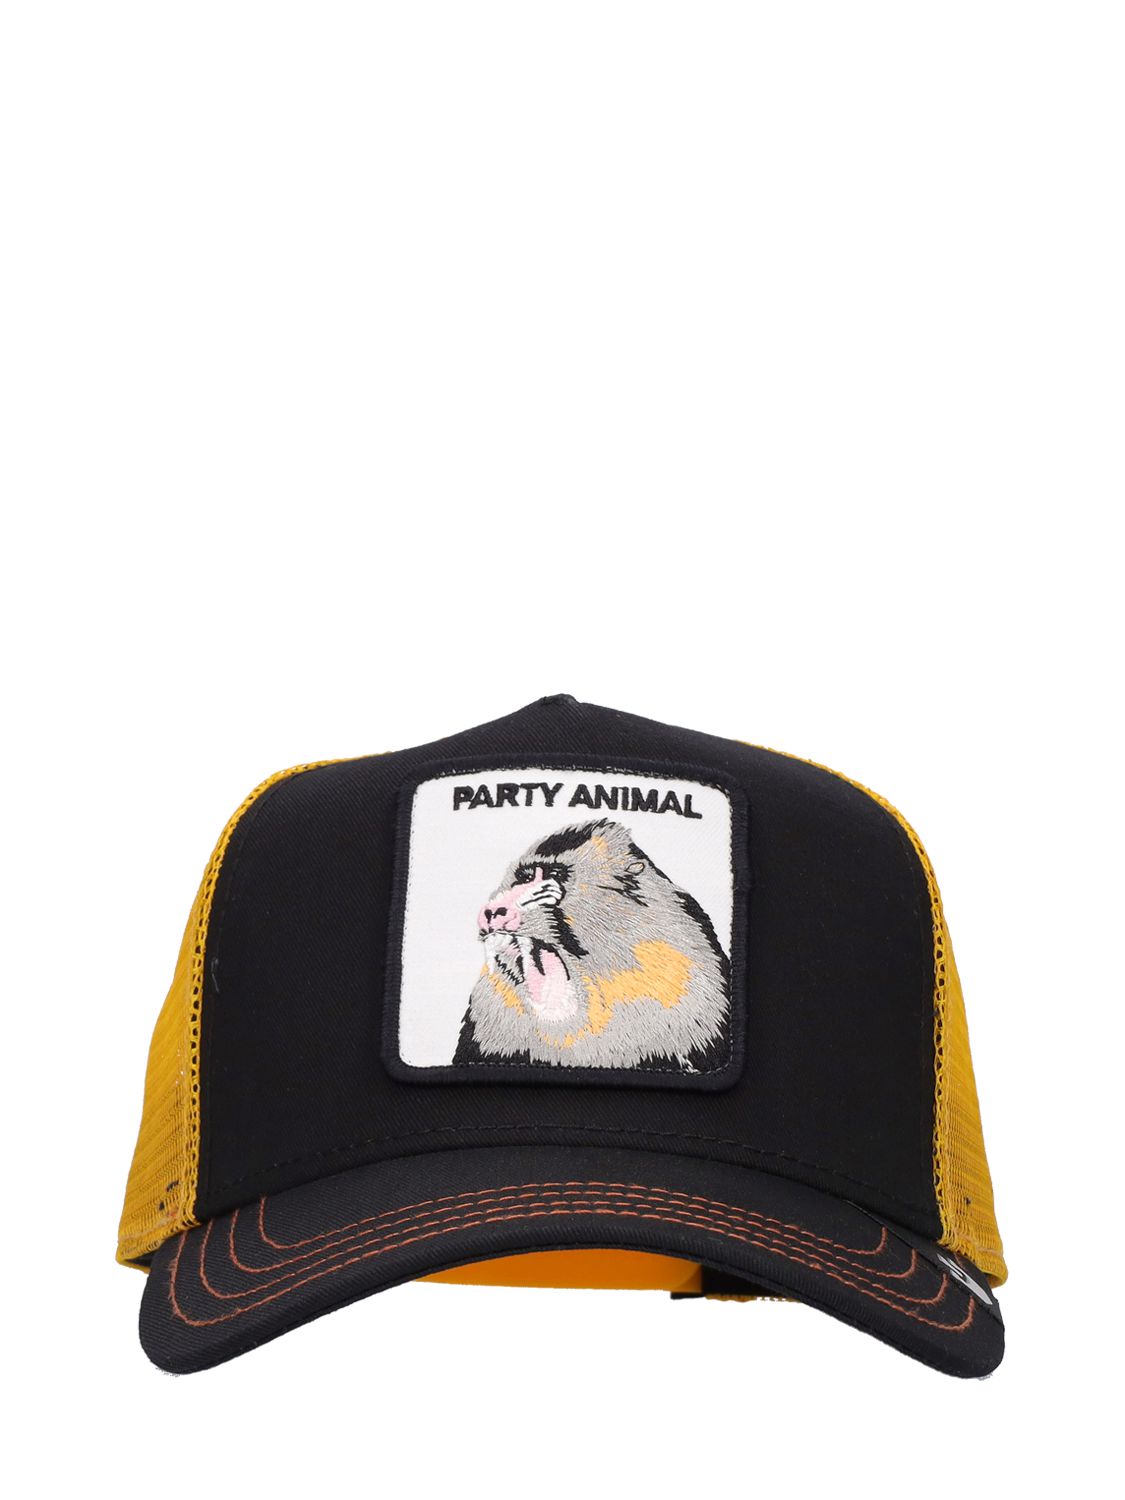 The Party Animal Trucker Hat W/ Patch